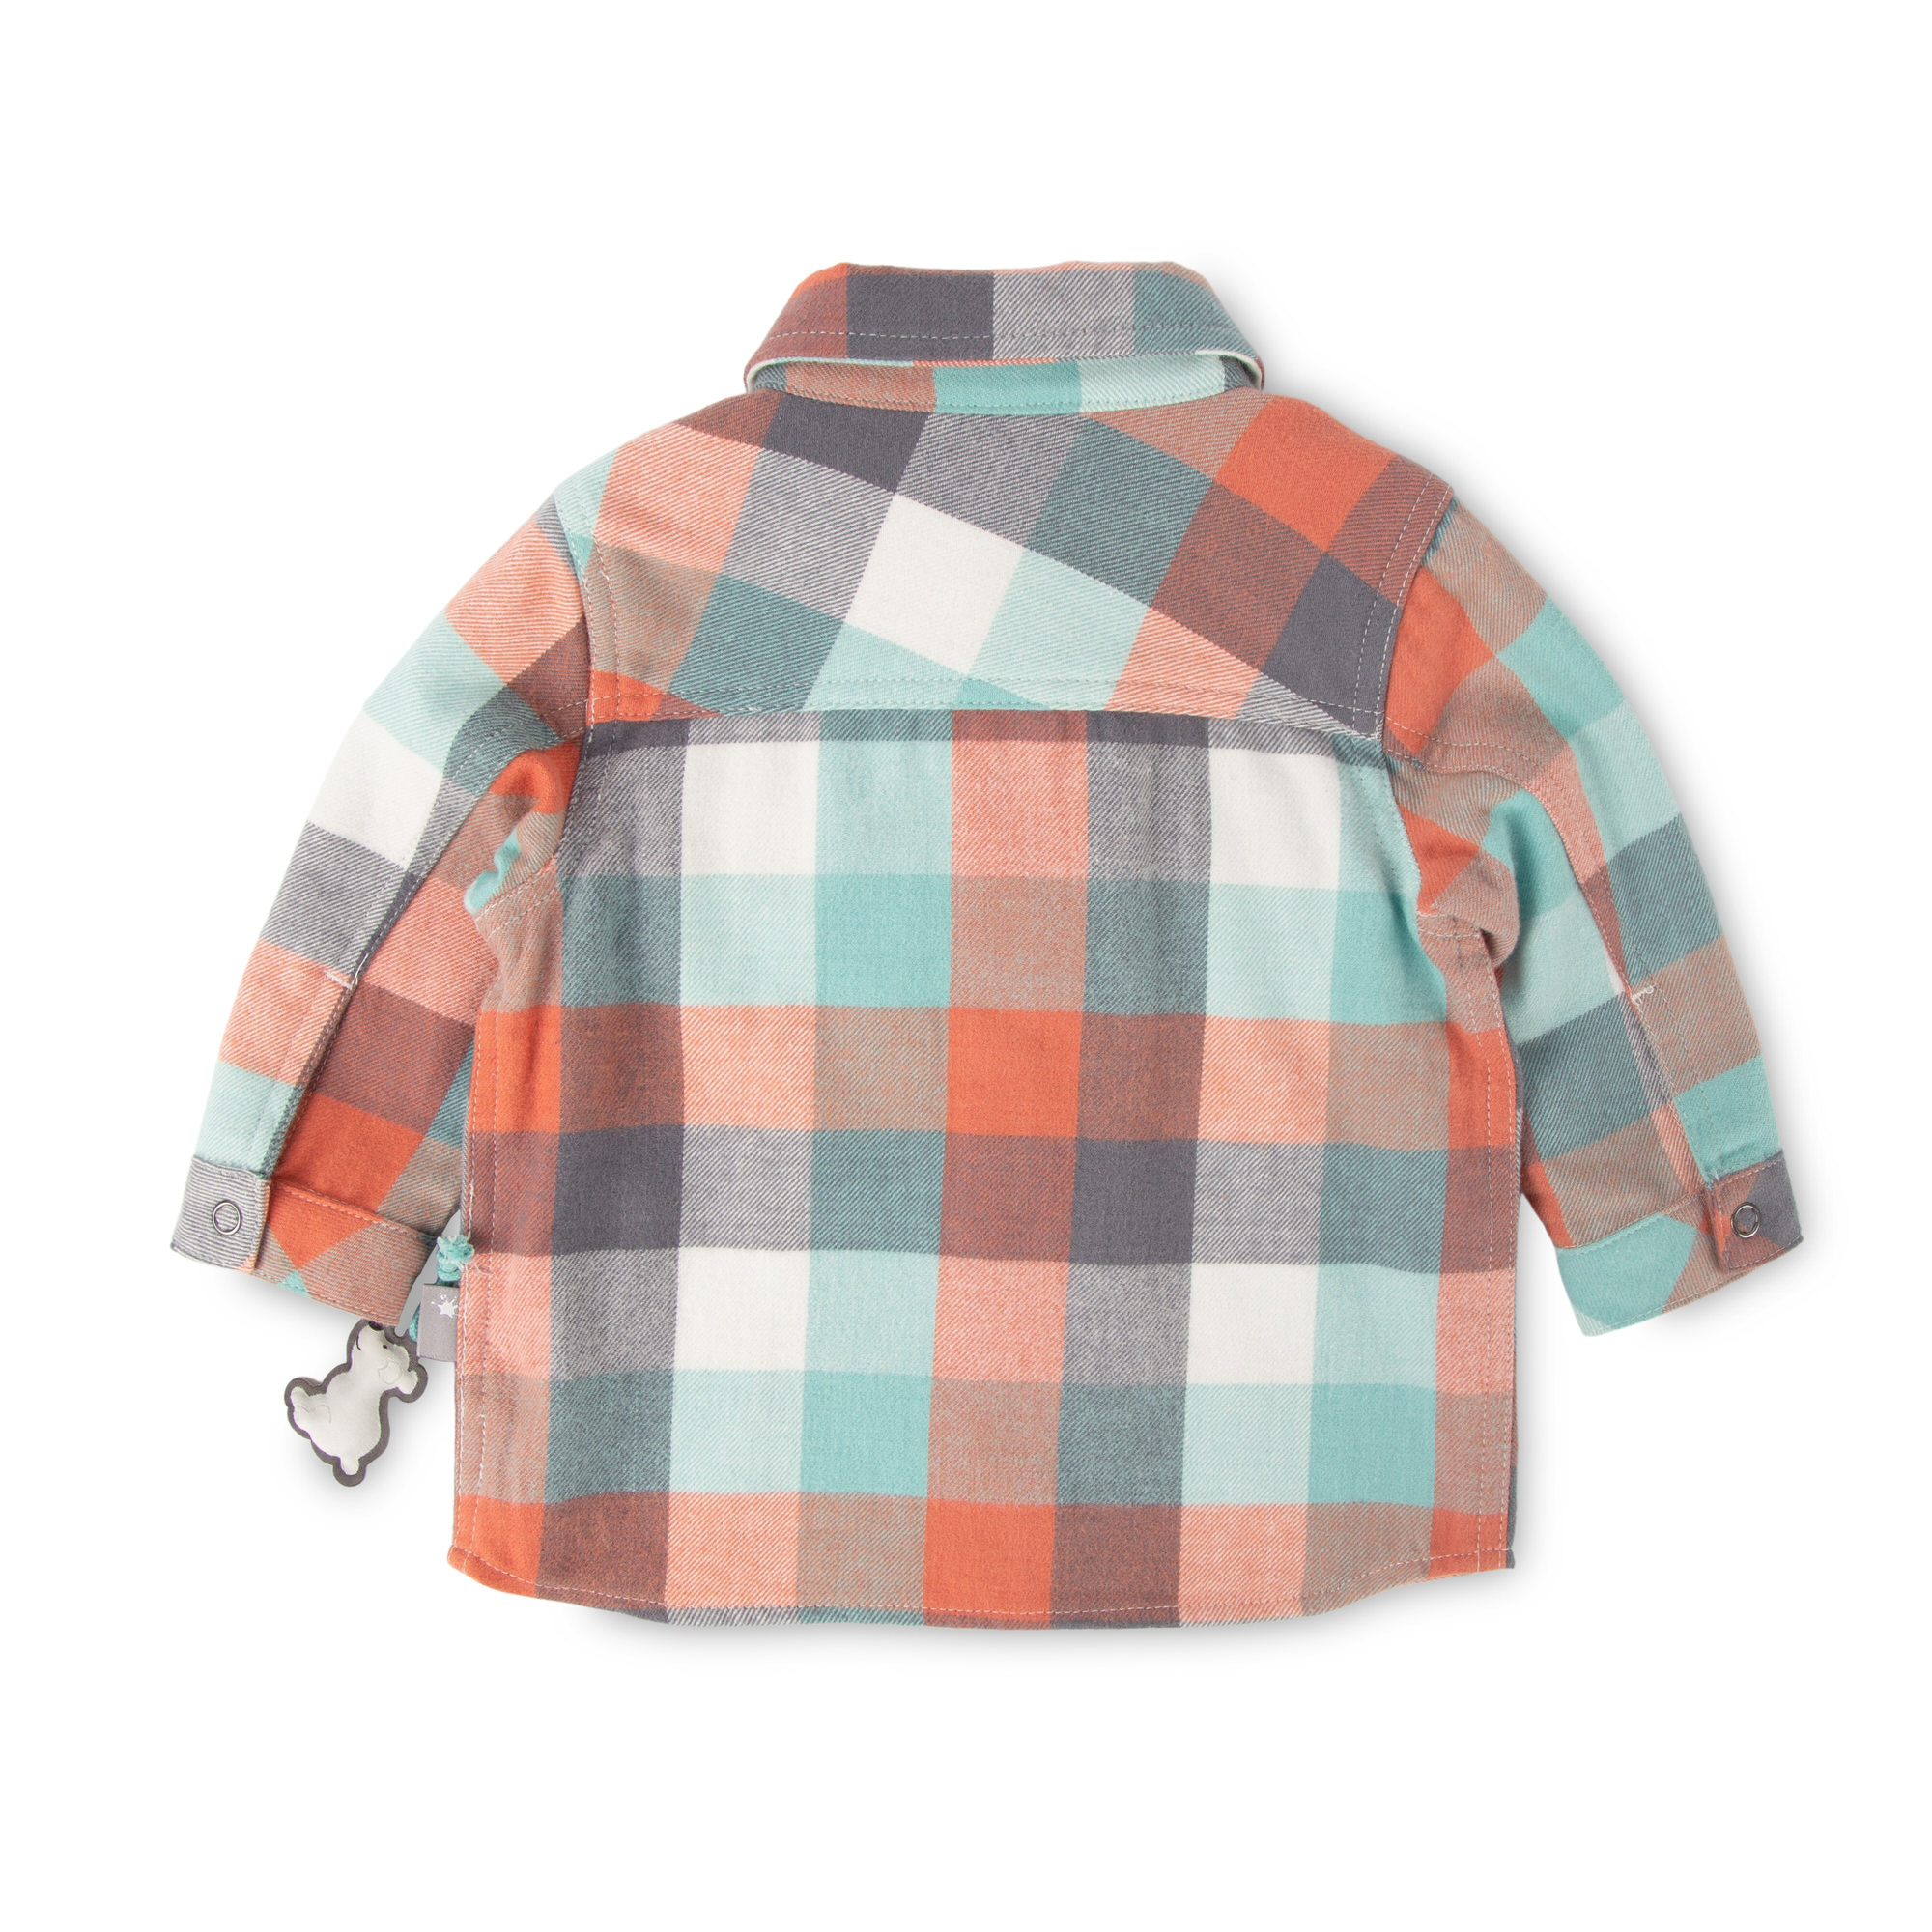 Baby long sleeve flannel shirt with pockets, plaid